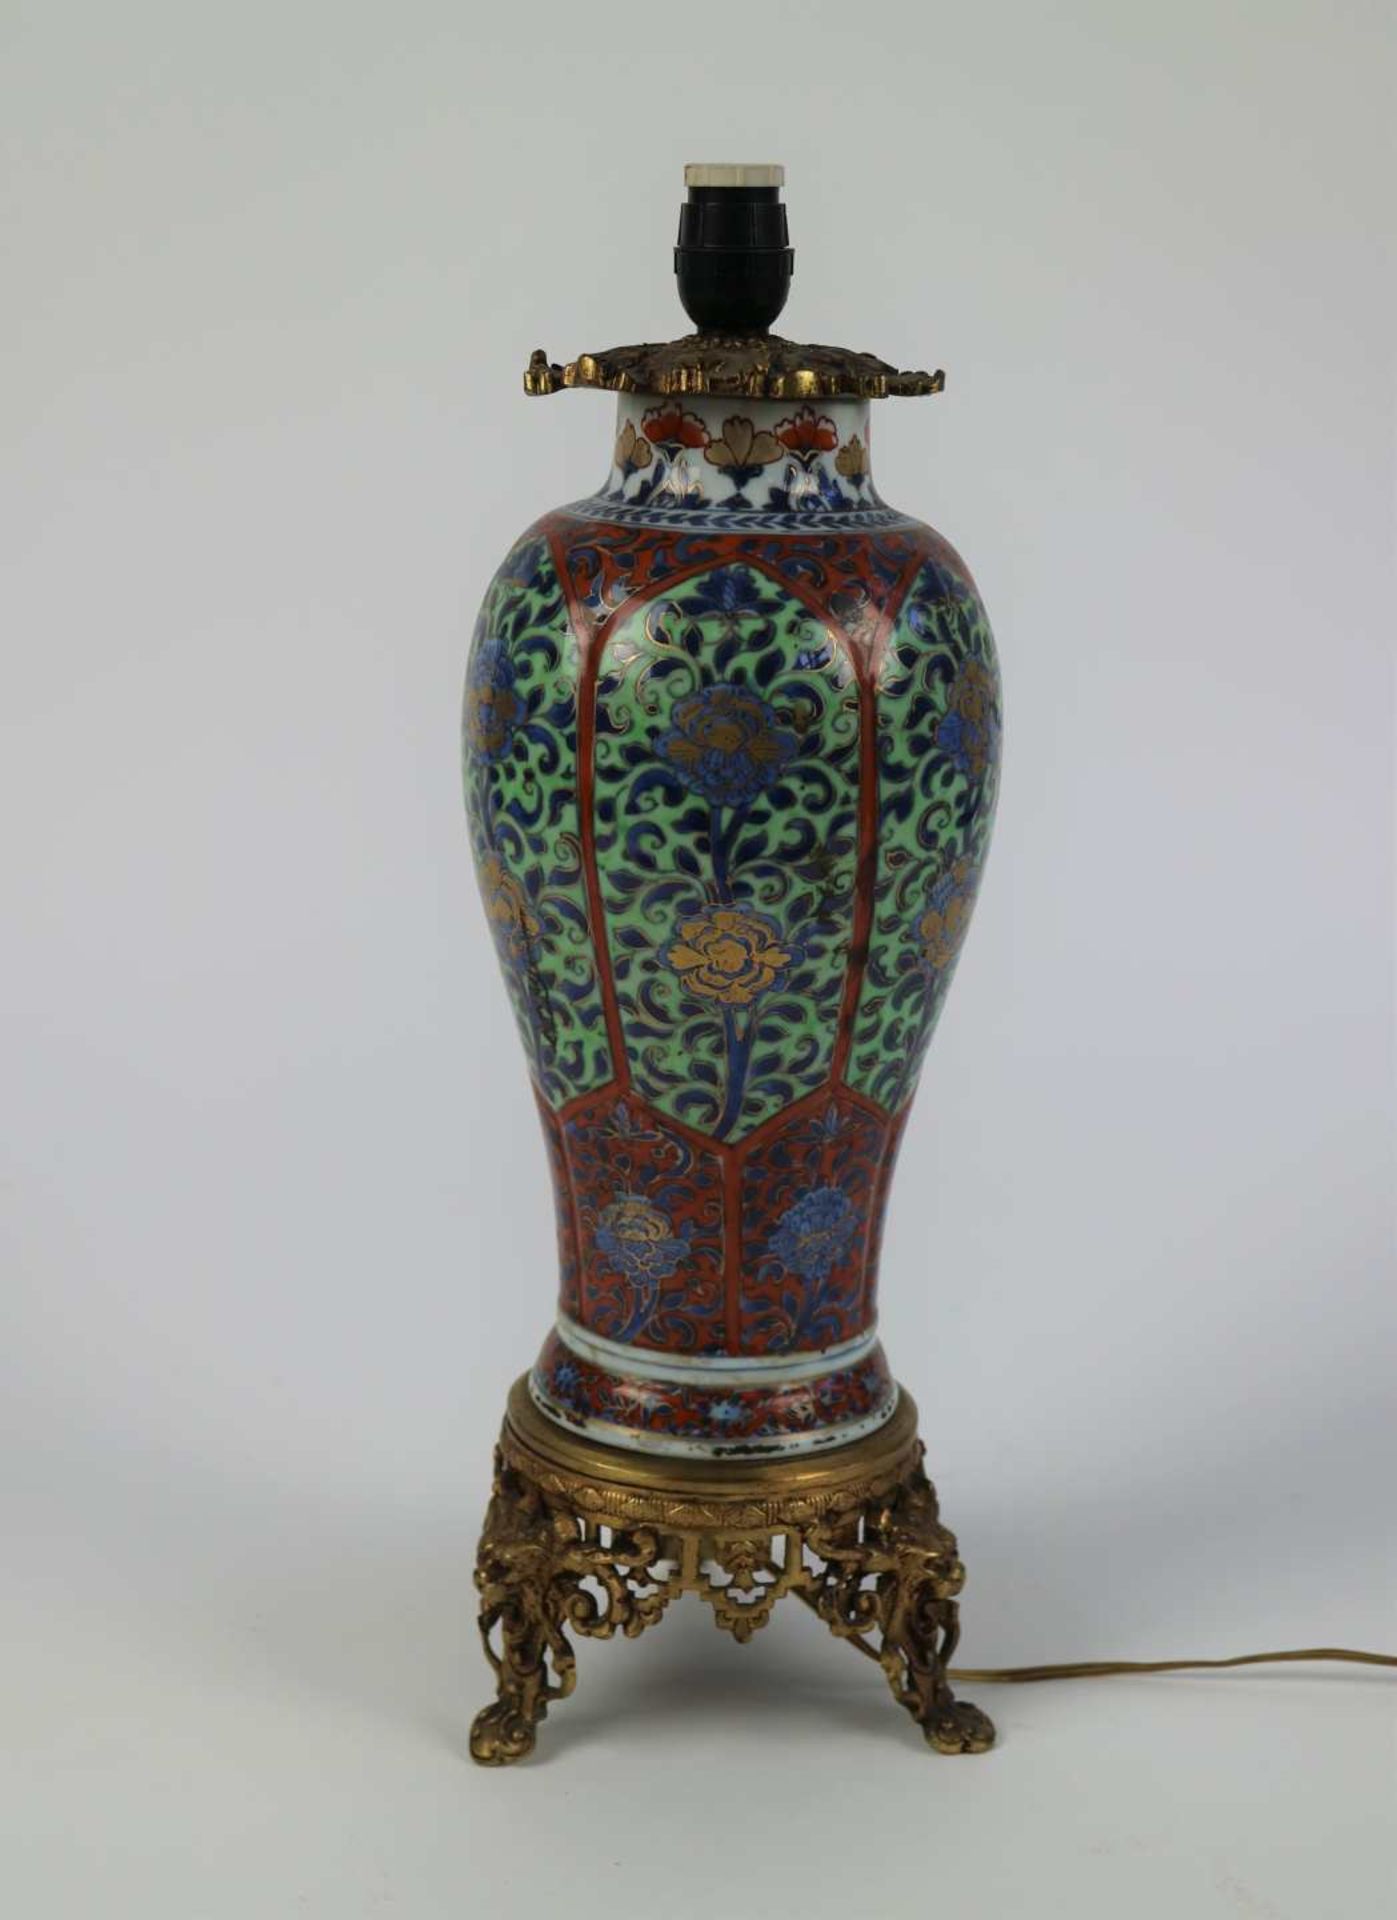 Chinese cloisonné vase with bronze mount, late 19th century